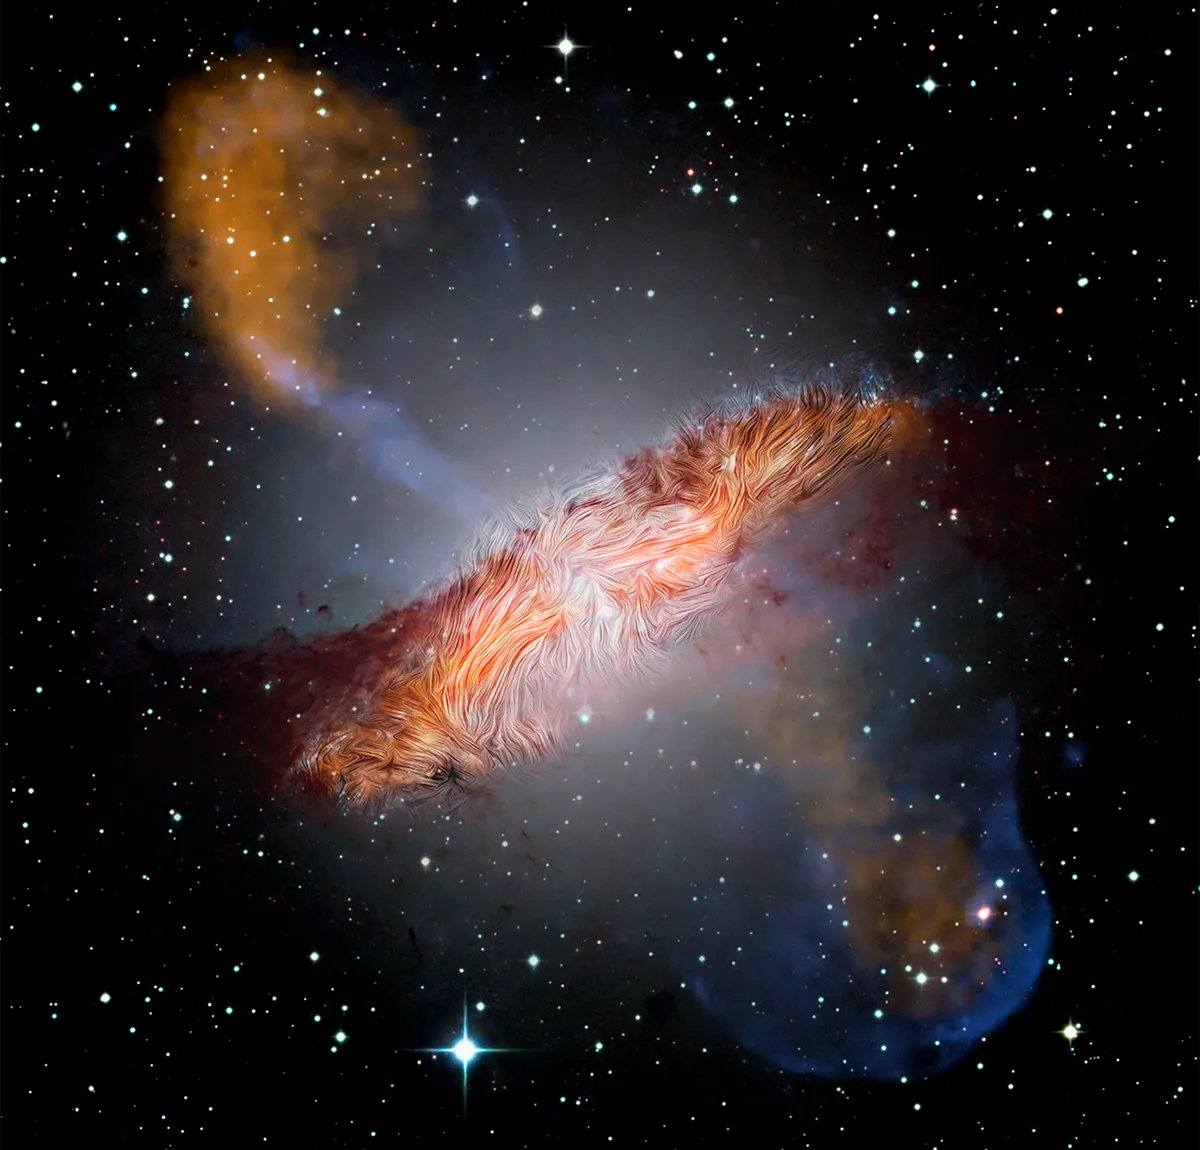 Magnetic fields around Centaurus A. SOFIA/EUROPEAN SOUTHERN OBSERVATORY AND ATACAMA PATHFINDER EXPERIMENT/ CHANDRA X-RAY OBSERVATORY/SPITZER SPACE TELESCOPE, 8 APRIL 2021. IMAGE CREDIT: Optical: European Southern Observatory (ESO) Wide Field Imager; Submillimeter: Max Planck Institute for Radio Astronomy/ESO/Atacama Pathfinder Experiment (APEX)/A.Weiss et al.; X-ray and Infrared: NASA/Chandra/R. Kraft; JPL-Caltech/J. Keene; SOFIA/L. Proudfit